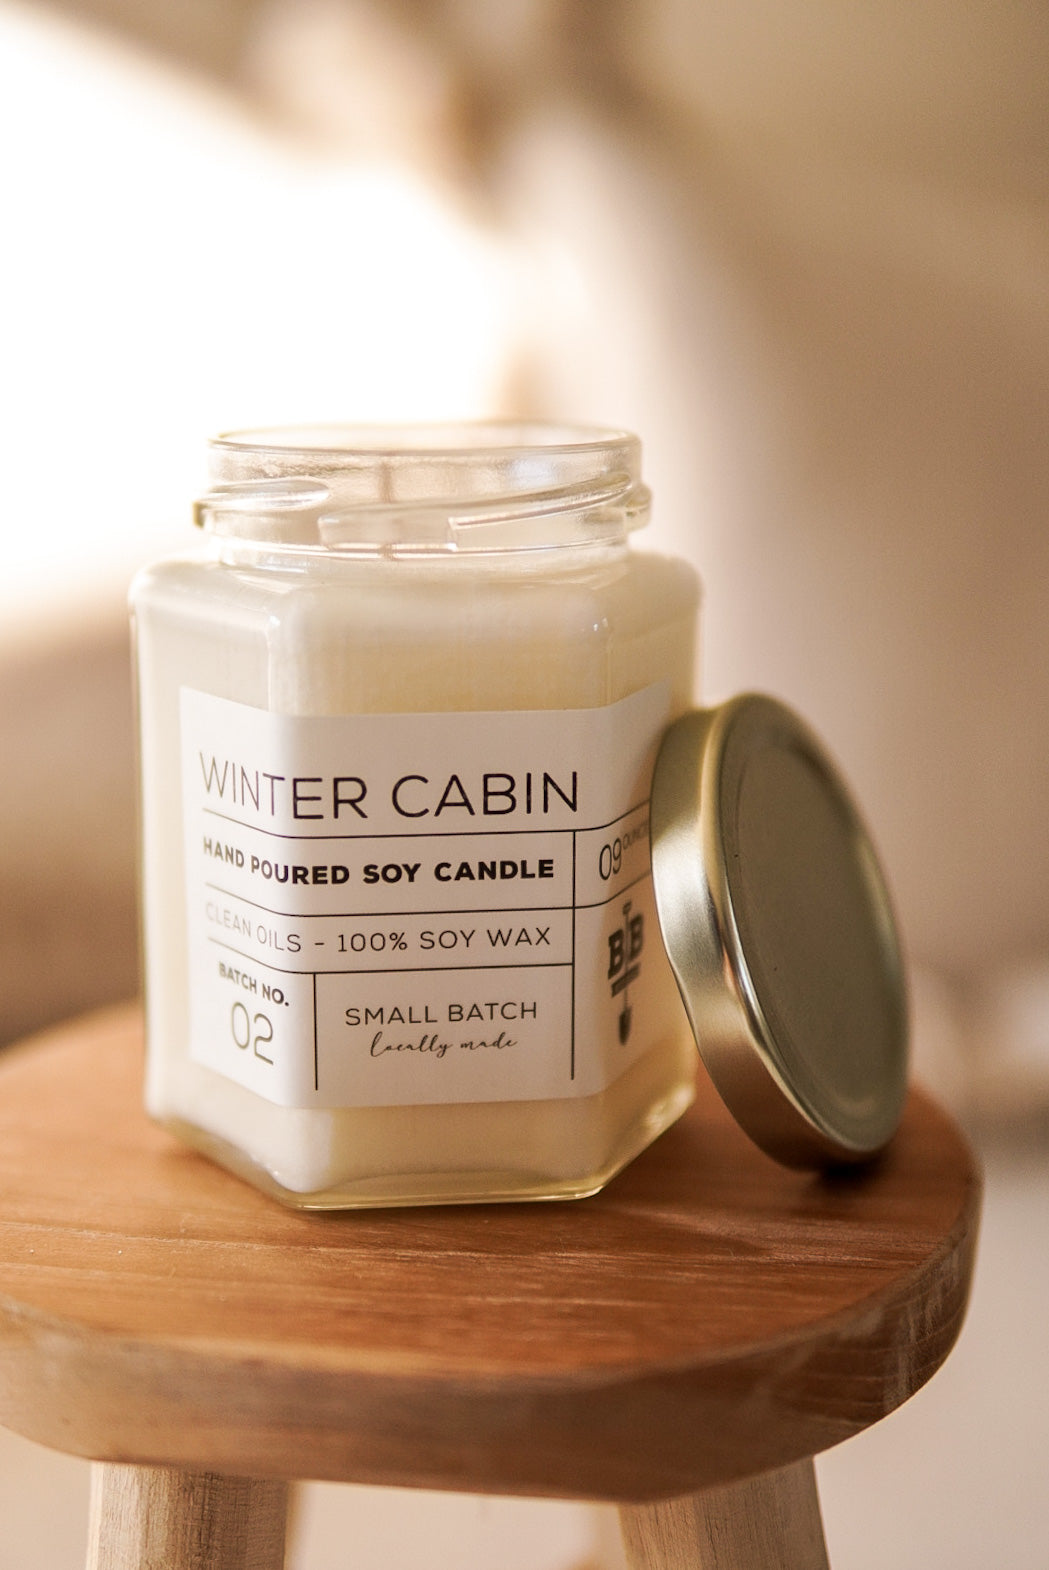 09 Ounce Winter Cabin Candle